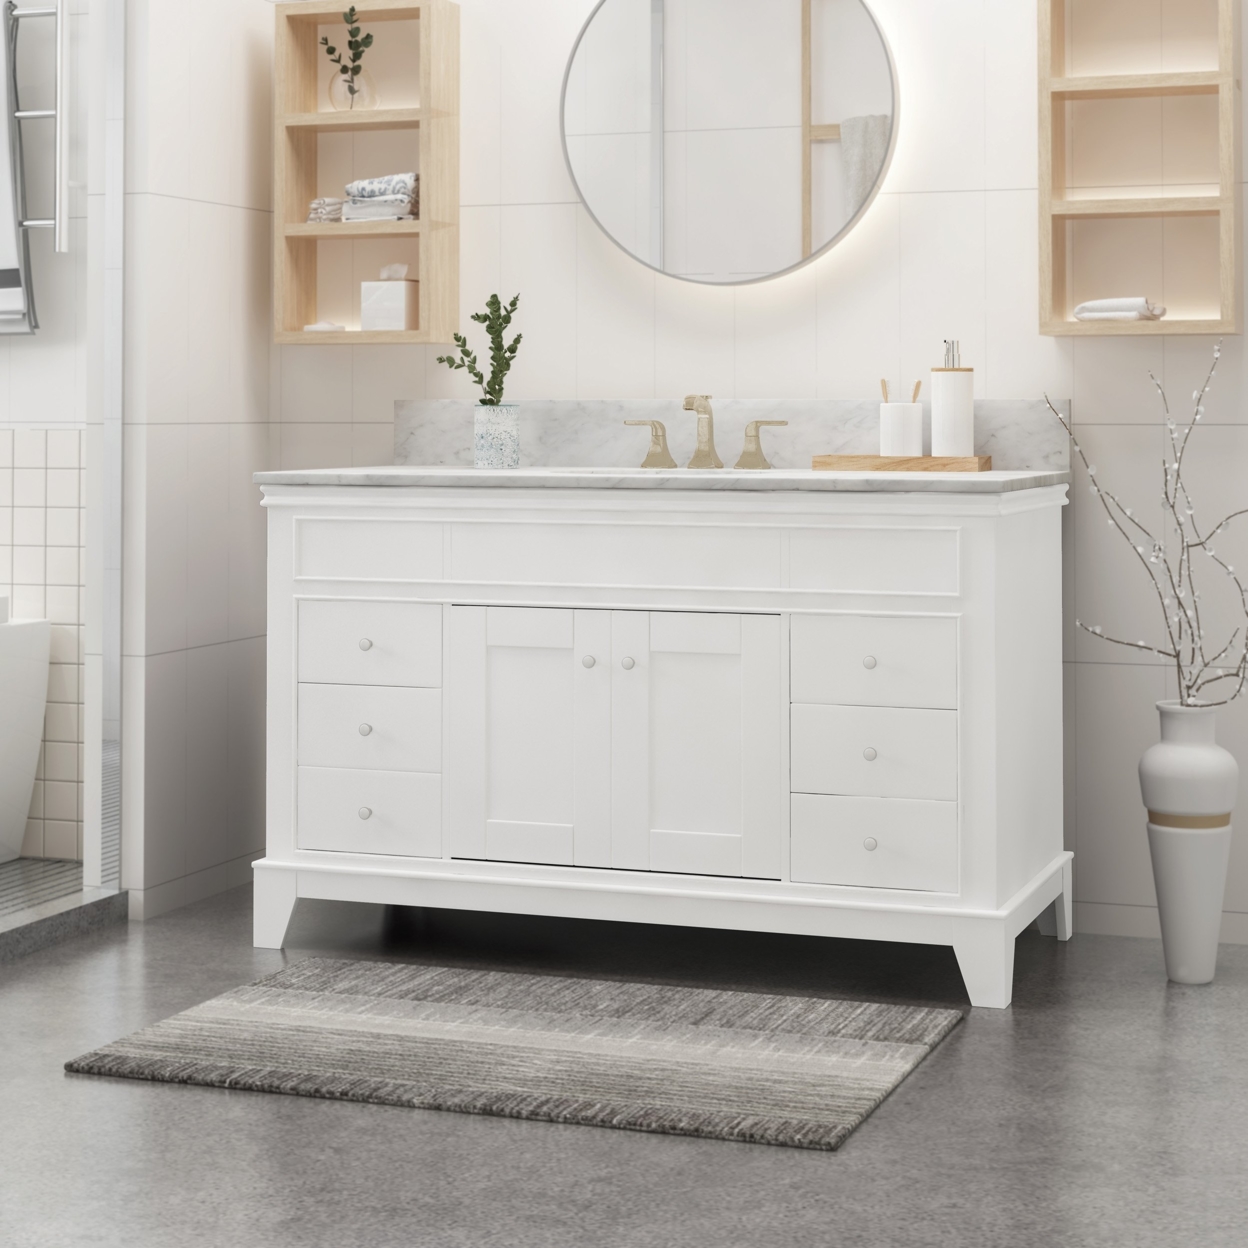 Feldspar Contemporary 48 Wood Single Sink Bathroom Vanity With Marble Counter Top With Carrara White Marble - White